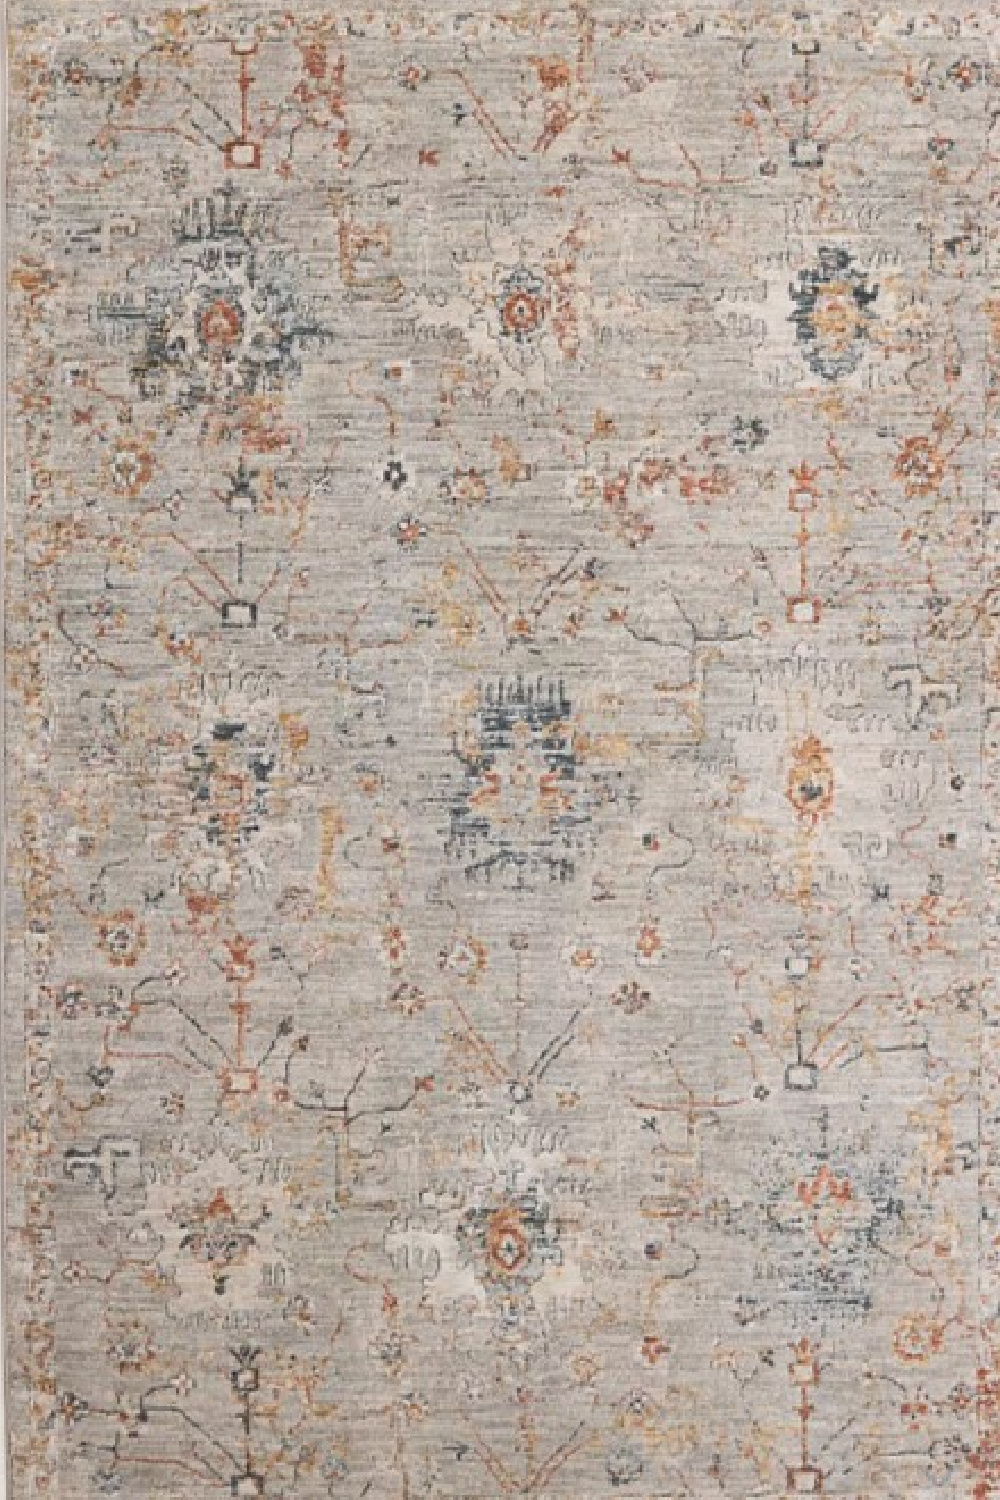 Revery Rug by Amber Lewis for Anthropologie. #arearugs